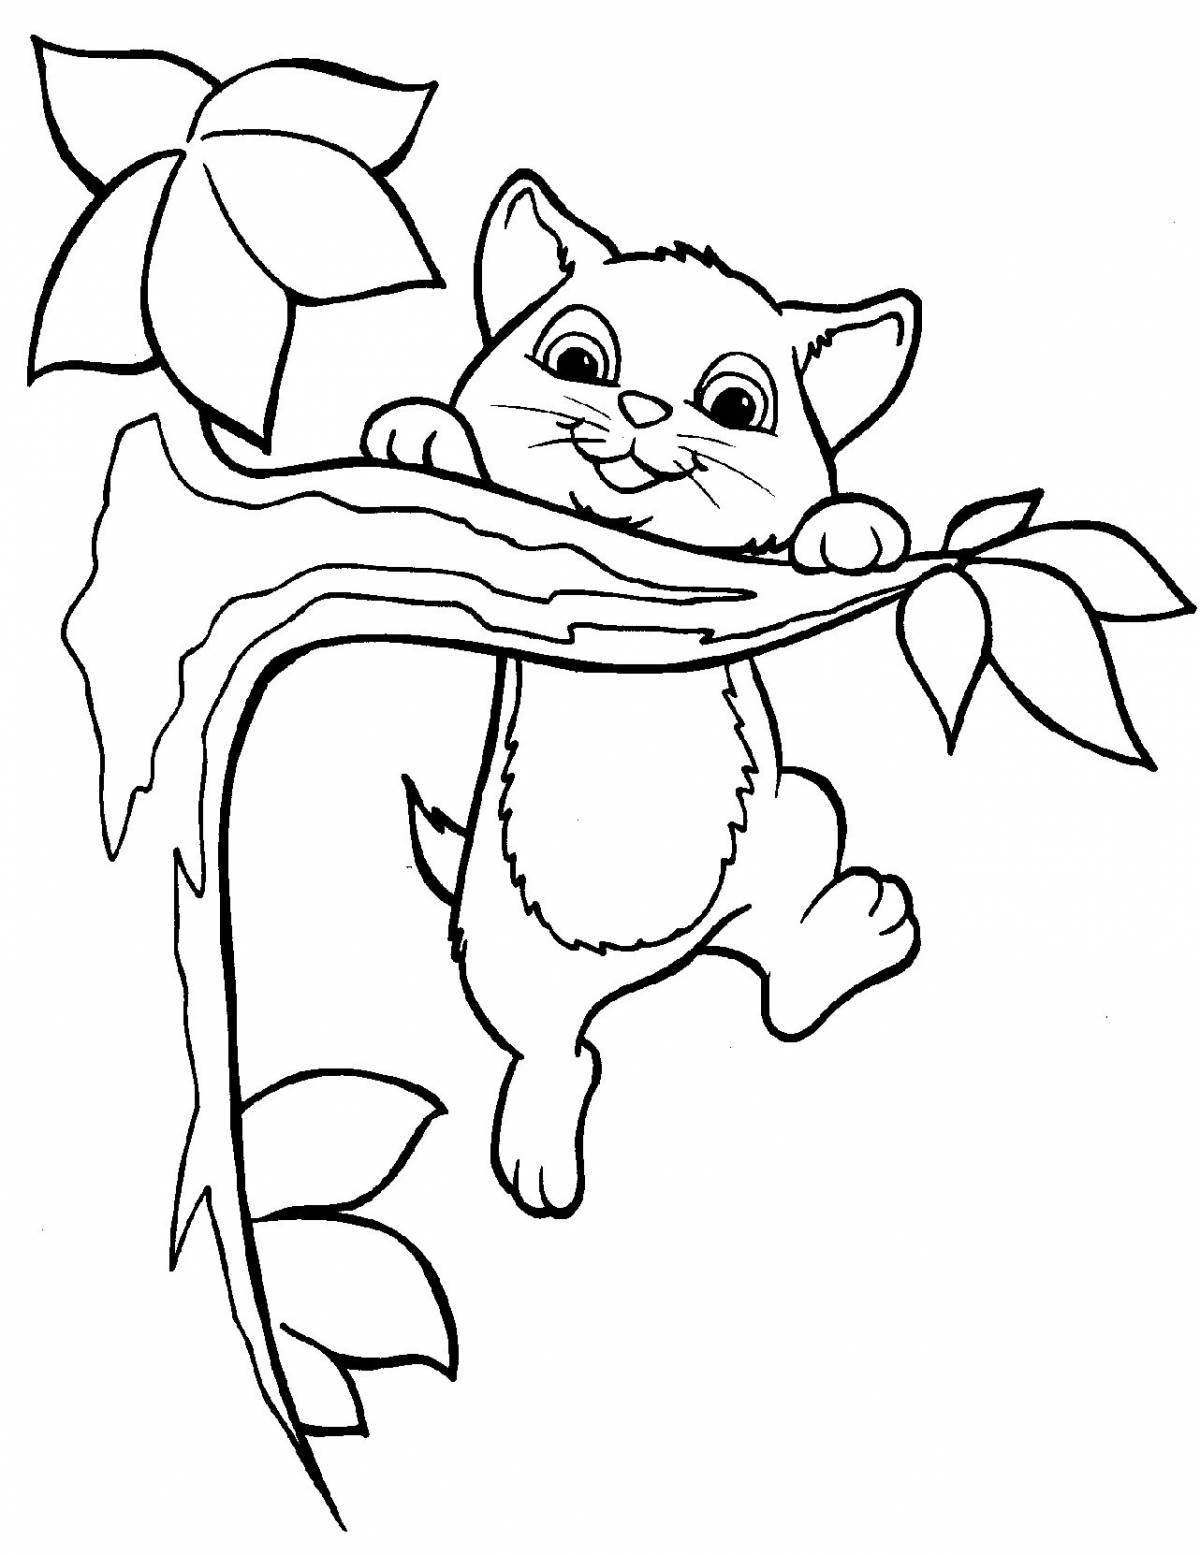 Creative kitty coloring book for 5-6 year olds